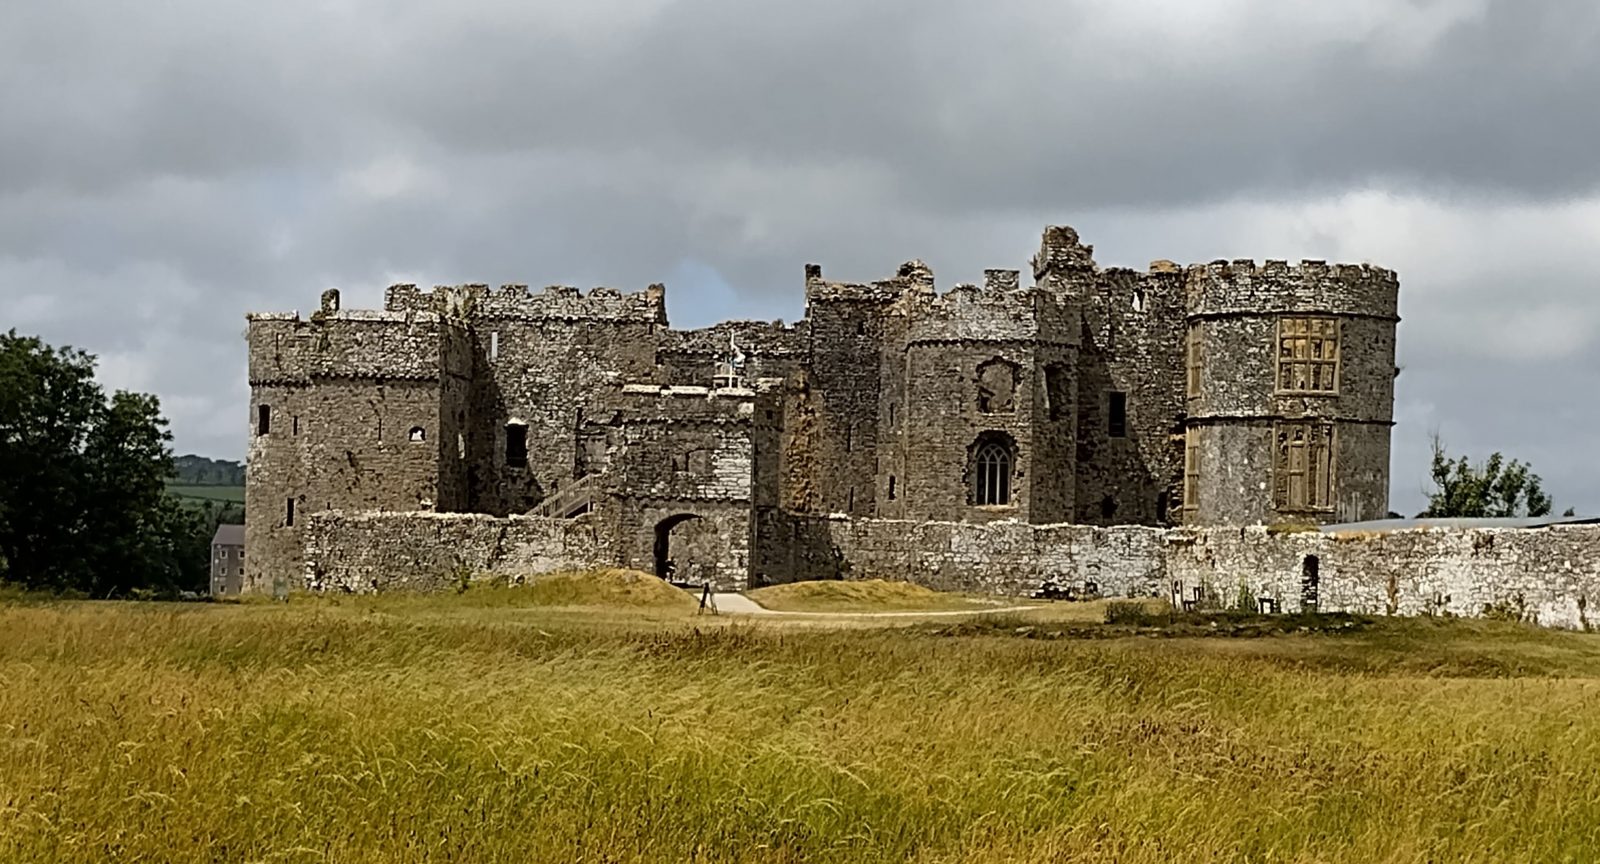 View of Carew Castle from the gatehouse side